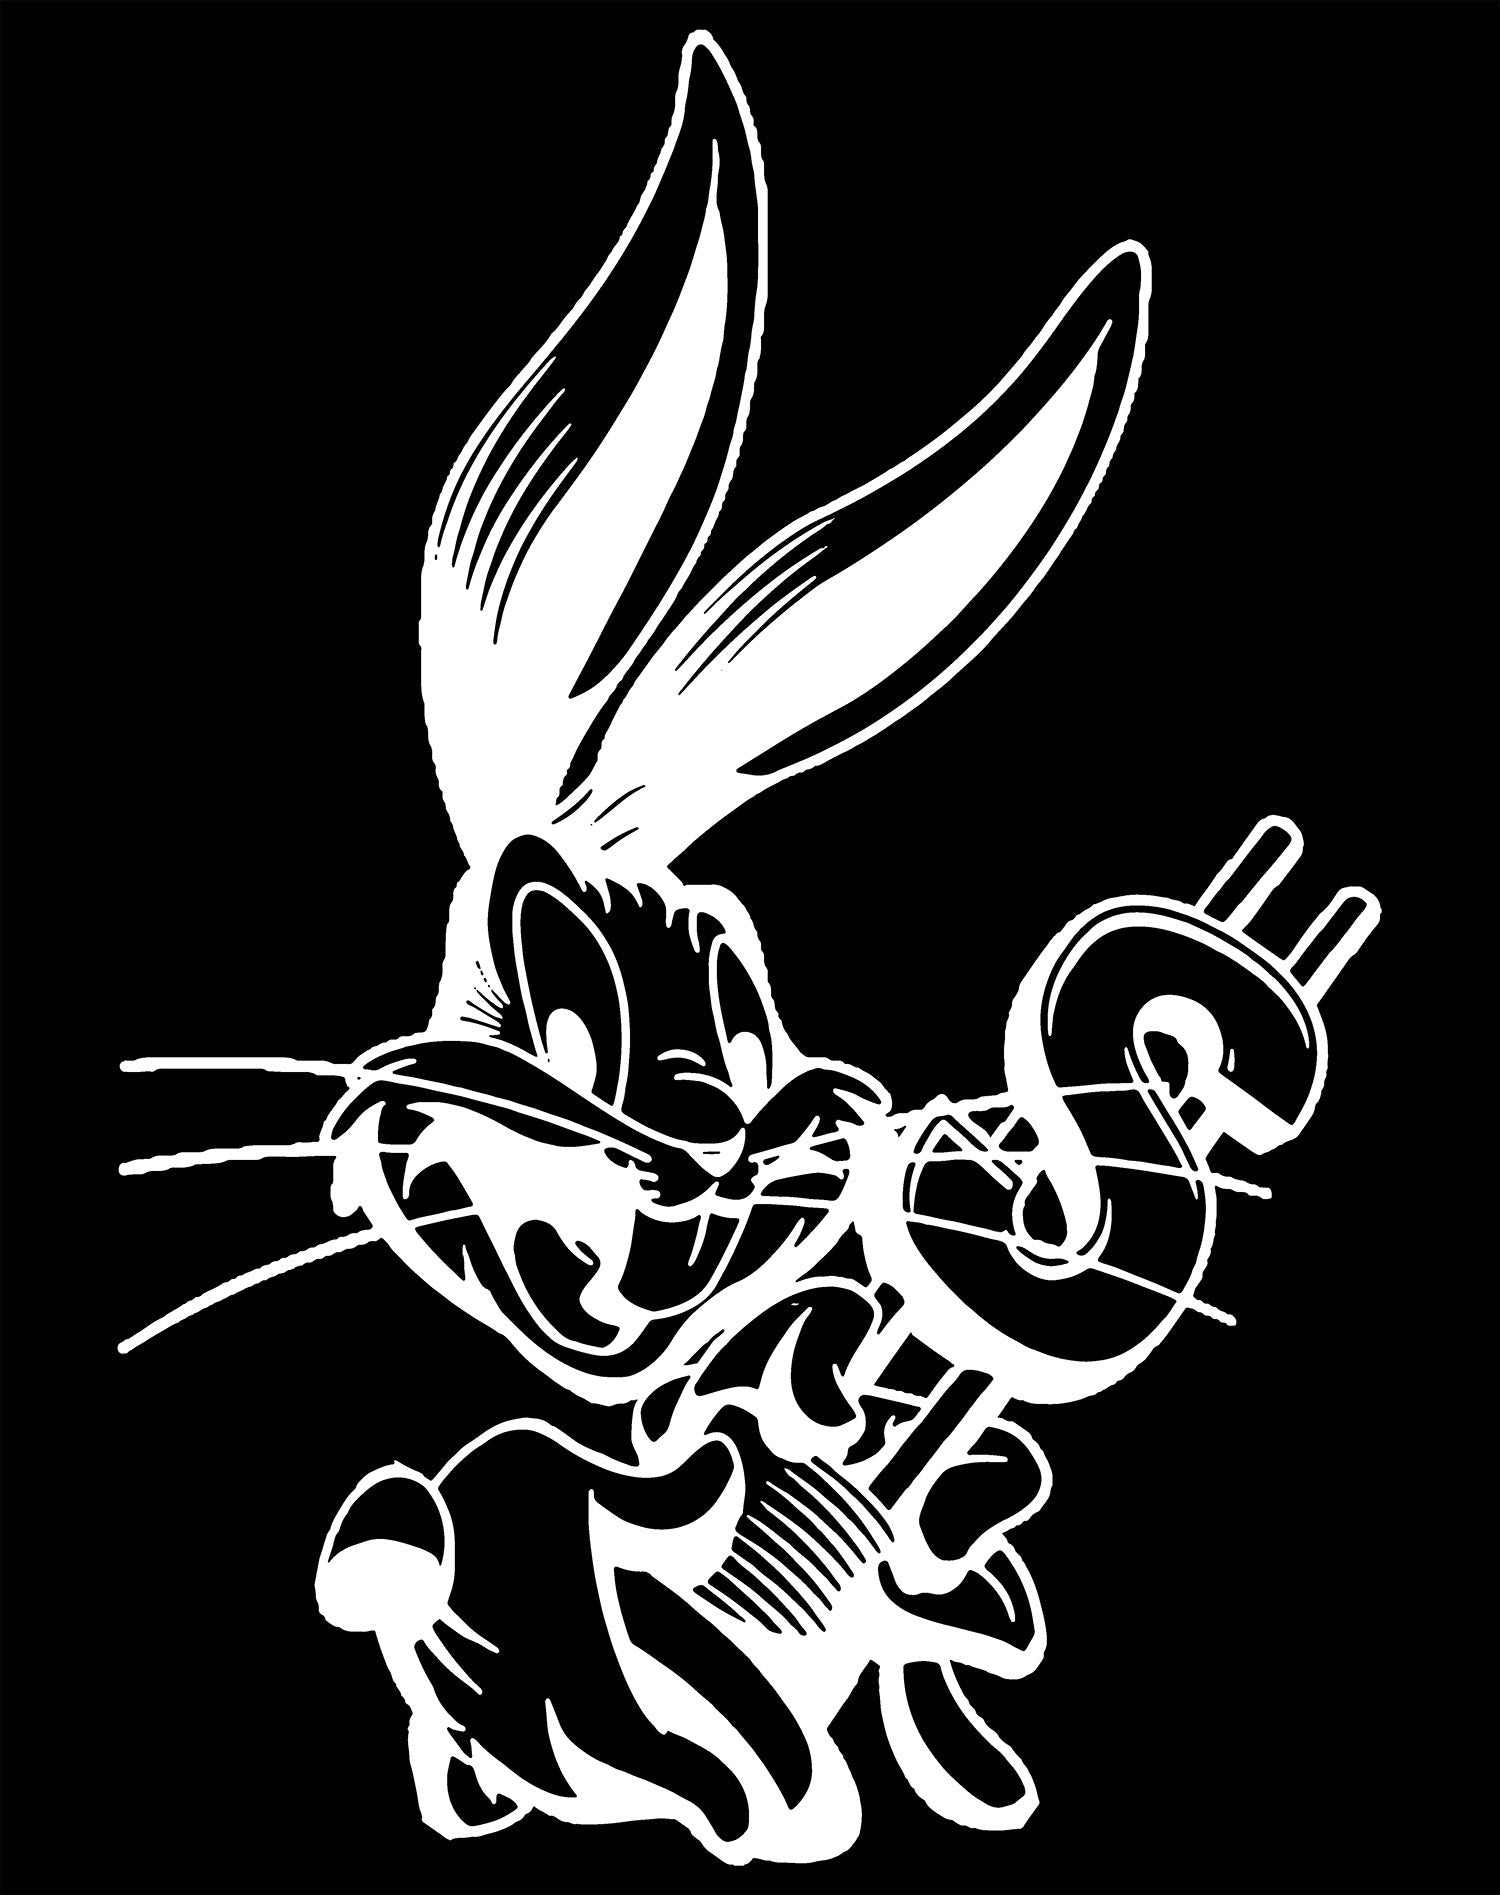 Looney Tunes Bugs Bunny Line Dollar Official Men's T-shirt